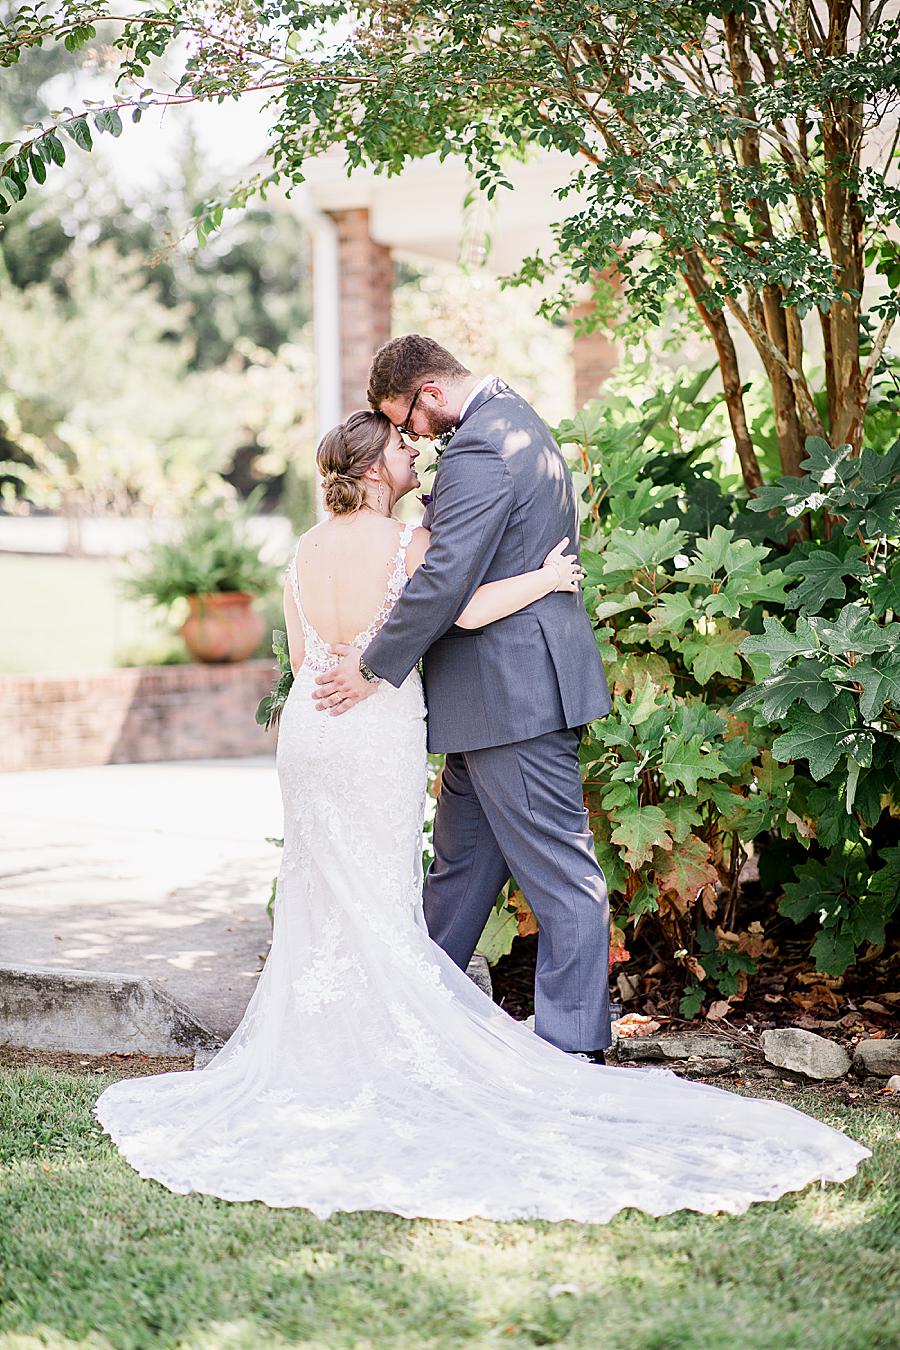 Heads together at this Hunter Valley Pavilion wedding by Knoxville Wedding Photographer, Amanda May Photos.